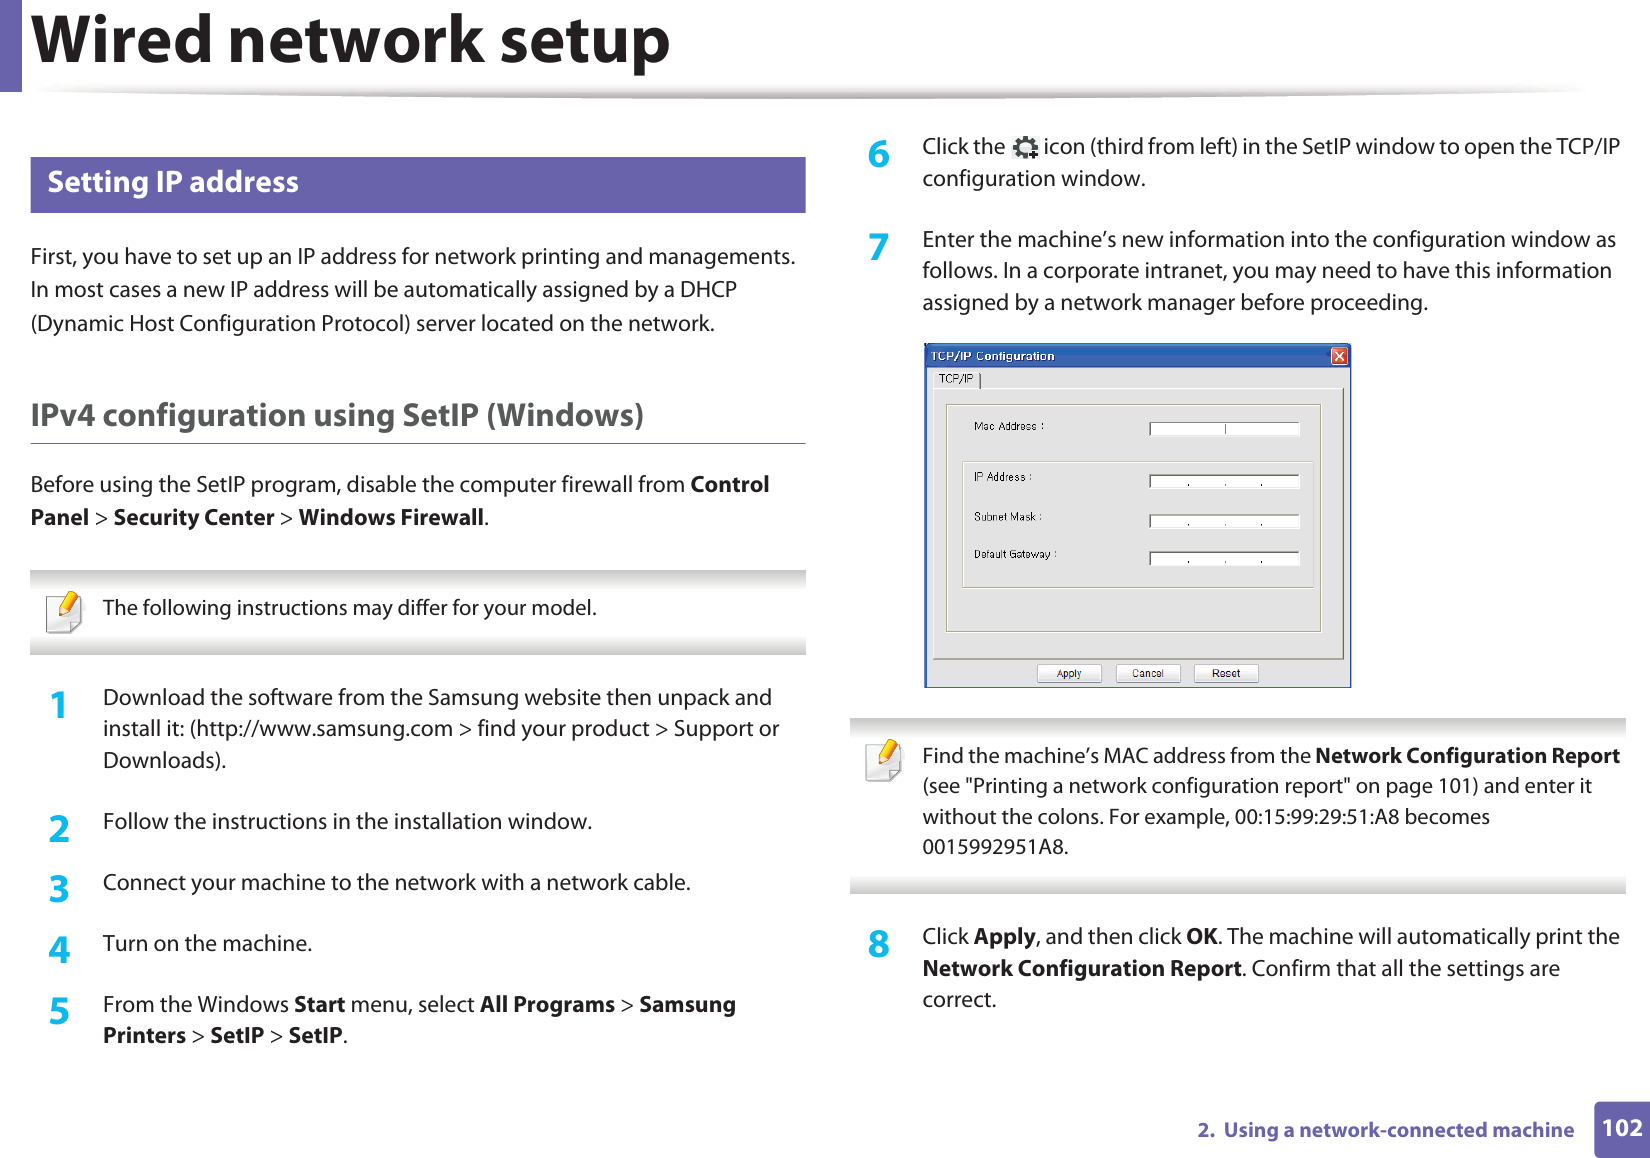 Wired network setup1022.  Using a network-connected machine5 Setting IP addressFirst, you have to set up an IP address for network printing and managements. In most cases a new IP address will be automatically assigned by a DHCP (Dynamic Host Configuration Protocol) server located on the network.IPv4 configuration using SetIP (Windows)Before using the SetIP program, disable the computer firewall from Control Panel &gt; Security Center &gt; Windows Firewall. The following instructions may differ for your model.  1Download the software from the Samsung website then unpack and install it: (http://www.samsung.com &gt; find your product &gt; Support or Downloads).2  Follow the instructions in the installation window.3  Connect your machine to the network with a network cable.4  Turn on the machine.5  From the Windows Start menu, select All Programs &gt; Samsung Printers &gt; SetIP &gt; SetIP.6  Click the   icon (third from left) in the SetIP window to open the TCP/IP configuration window.7  Enter the machine’s new information into the configuration window as follows. In a corporate intranet, you may need to have this information assigned by a network manager before proceeding. Find the machine’s MAC address from the Network Configuration Report (see &quot;Printing a network configuration report&quot; on page 101) and enter it without the colons. For example, 00:15:99:29:51:A8 becomes 0015992951A8. 8  Click Apply, and then click OK. The machine will automatically print the Network Configuration Report. Confirm that all the settings are correct.